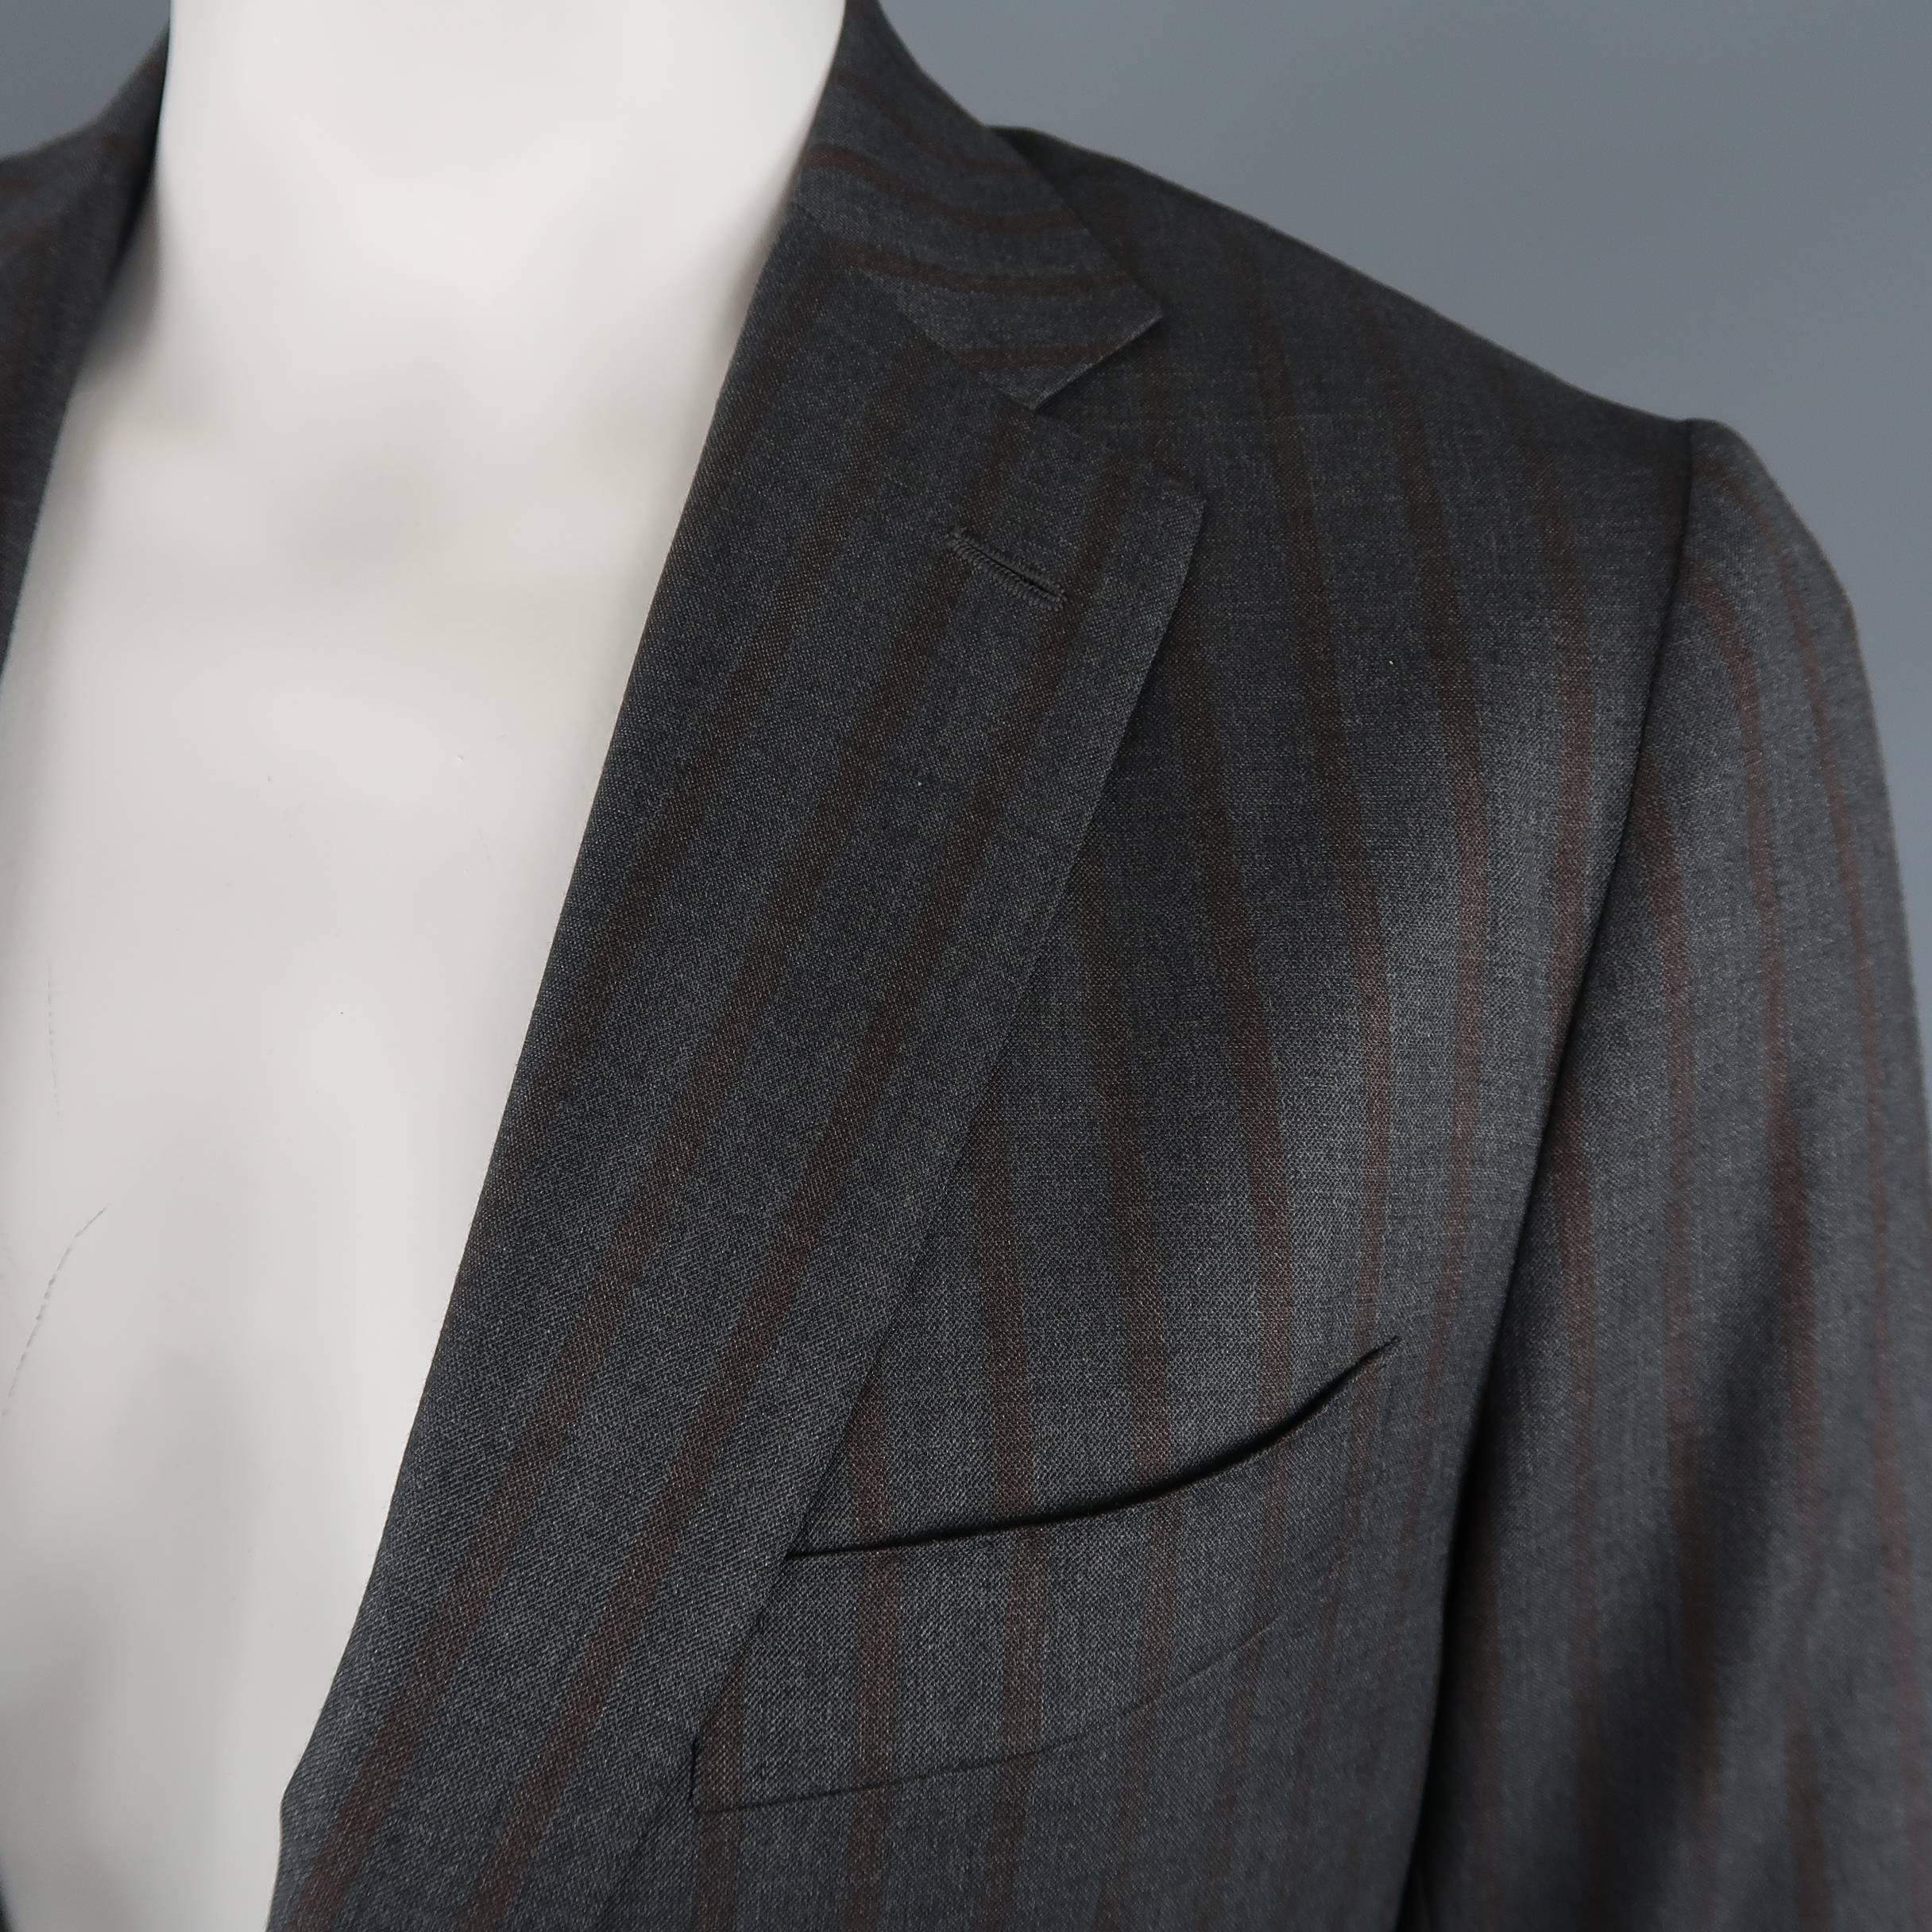 Single breasted ISAIA sport coat comes in dark gray and brown striped wool with a notch lapel, two button closure, and functional button cuffs.  Made in Italy.
 
Excellent Pre-Owned Condition.
Marked: IT 52
Measurements:
 
Shoulder: 17 in.
Chest: 44